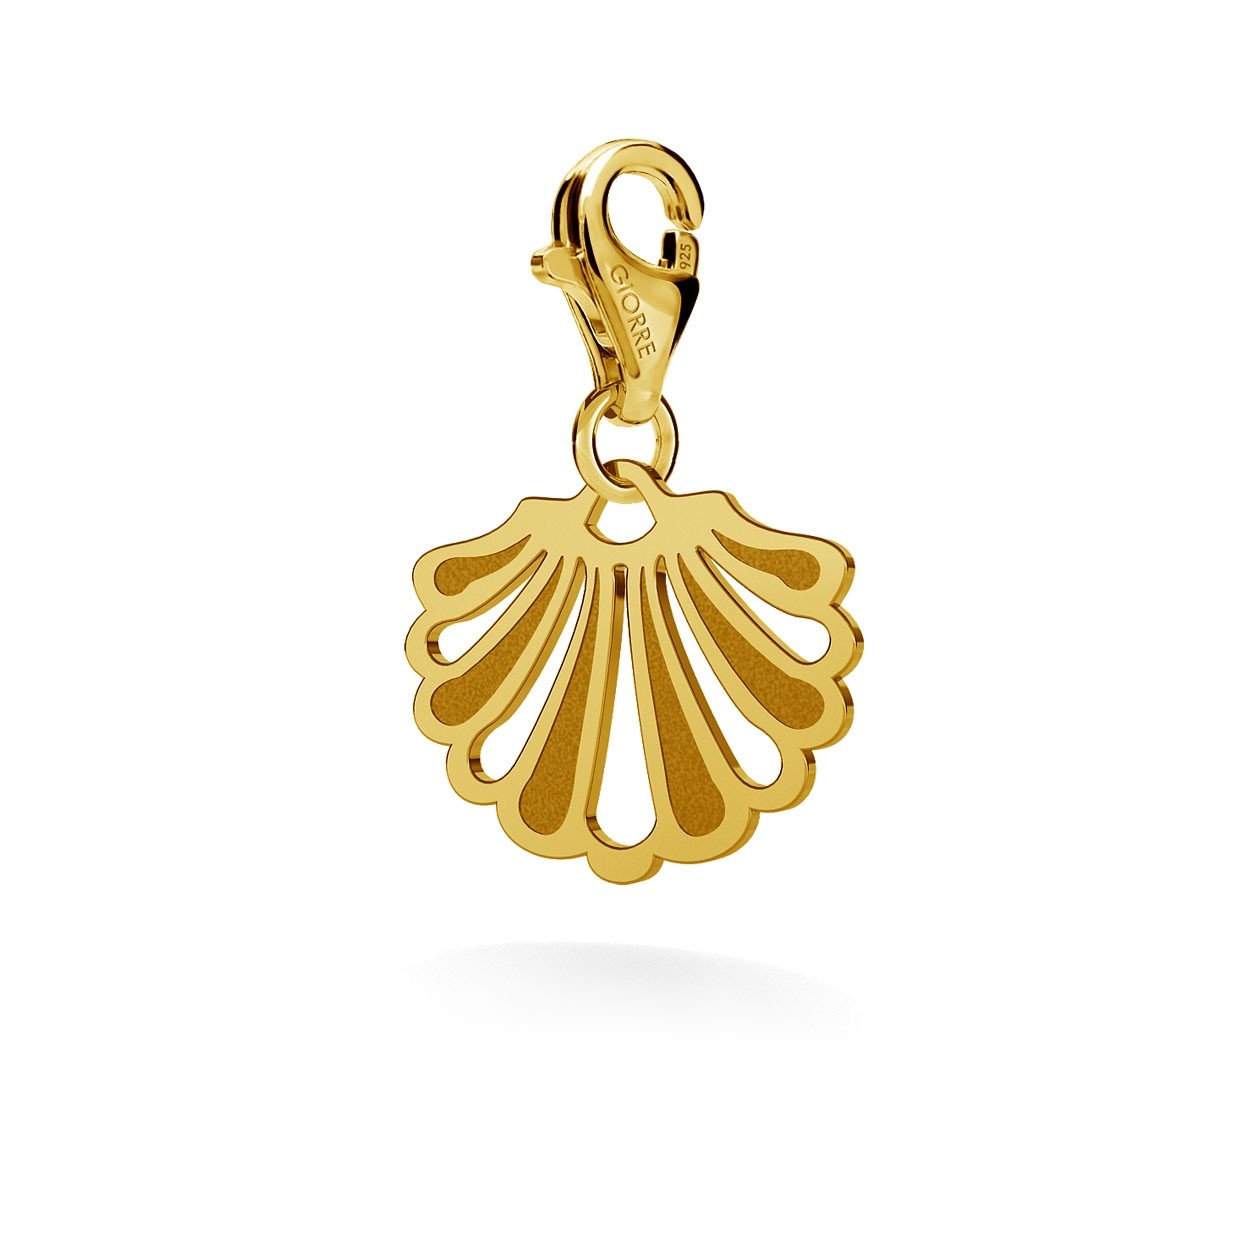 OPENWORK SHELL CHARM 102, SILVER 925, RHODIUM OR GOLD PLATED